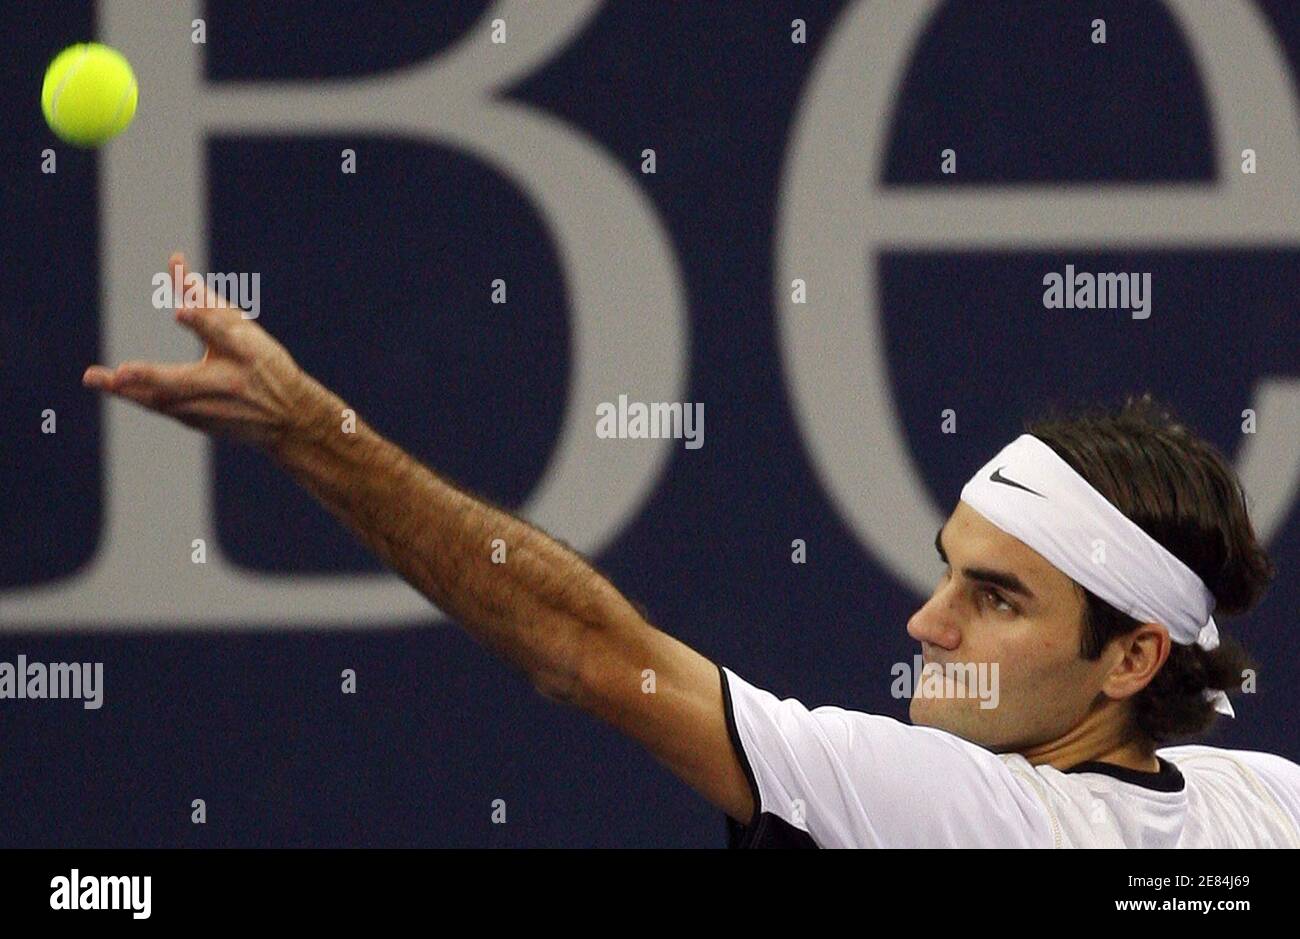 Roger Federer of Switzerland serves to Guillermo Coria of Argentinain Tennis  Masters Cup in Shanghai, China November 17, 2005. Federer won 6-0 1-6 6-2.  REUTERS/Nir Elias Stock Photo - Alamy